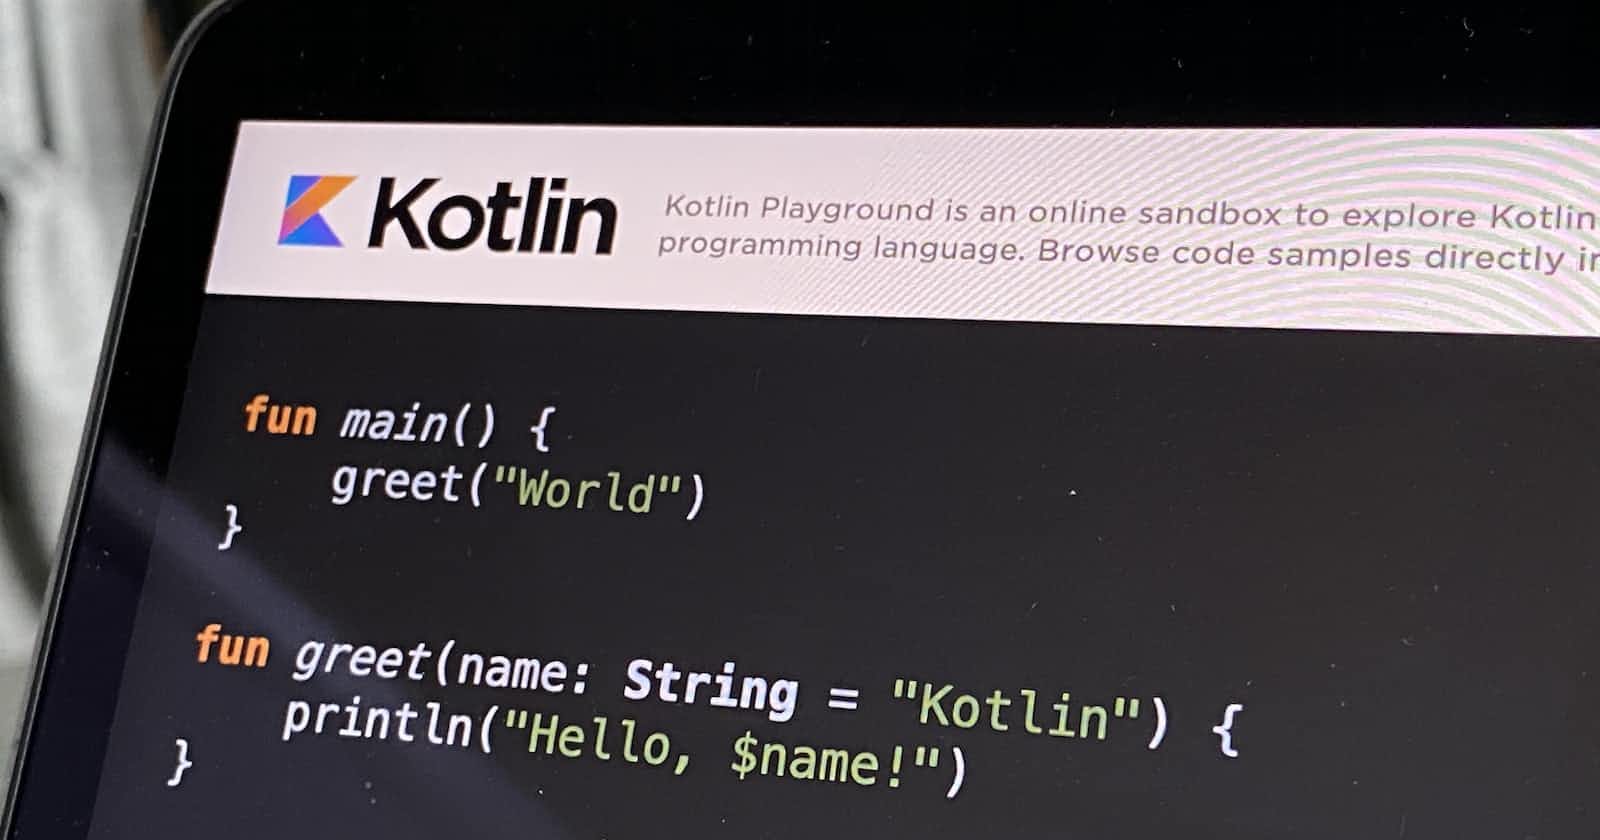 What makes Kotlin different?